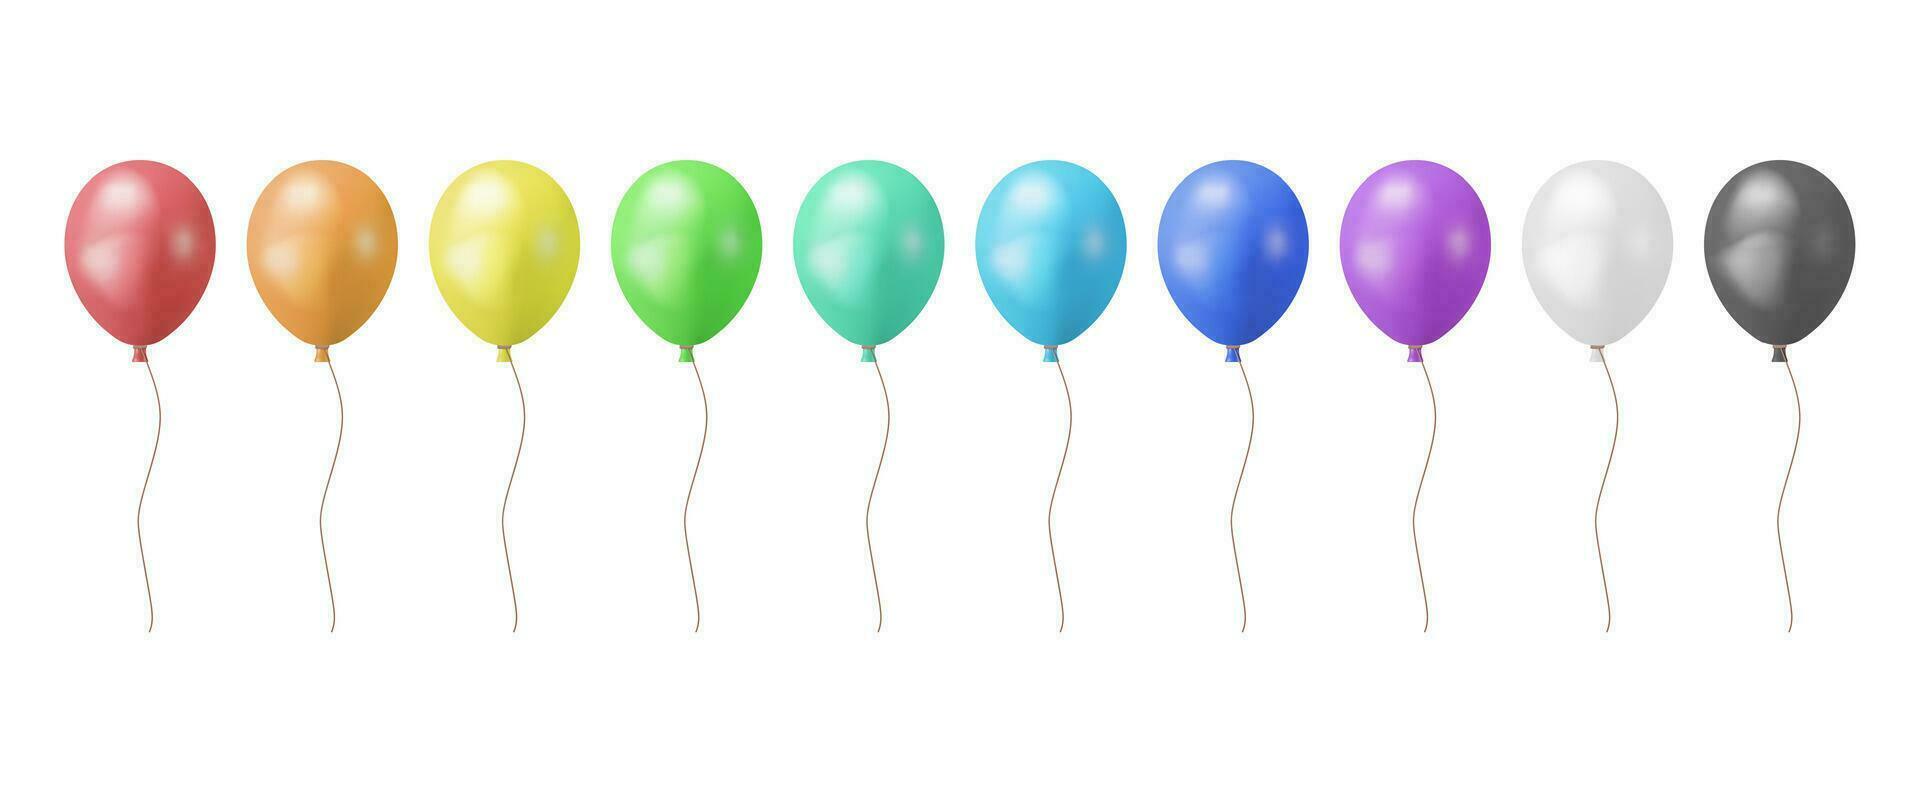 3D set of Balloon Isolated on White Background. Render Realistic Helium Balloons in Red, Yellow, Green, Blue, Black and White Color. Template for Anniversary, Birthday Party. Vector Illustration